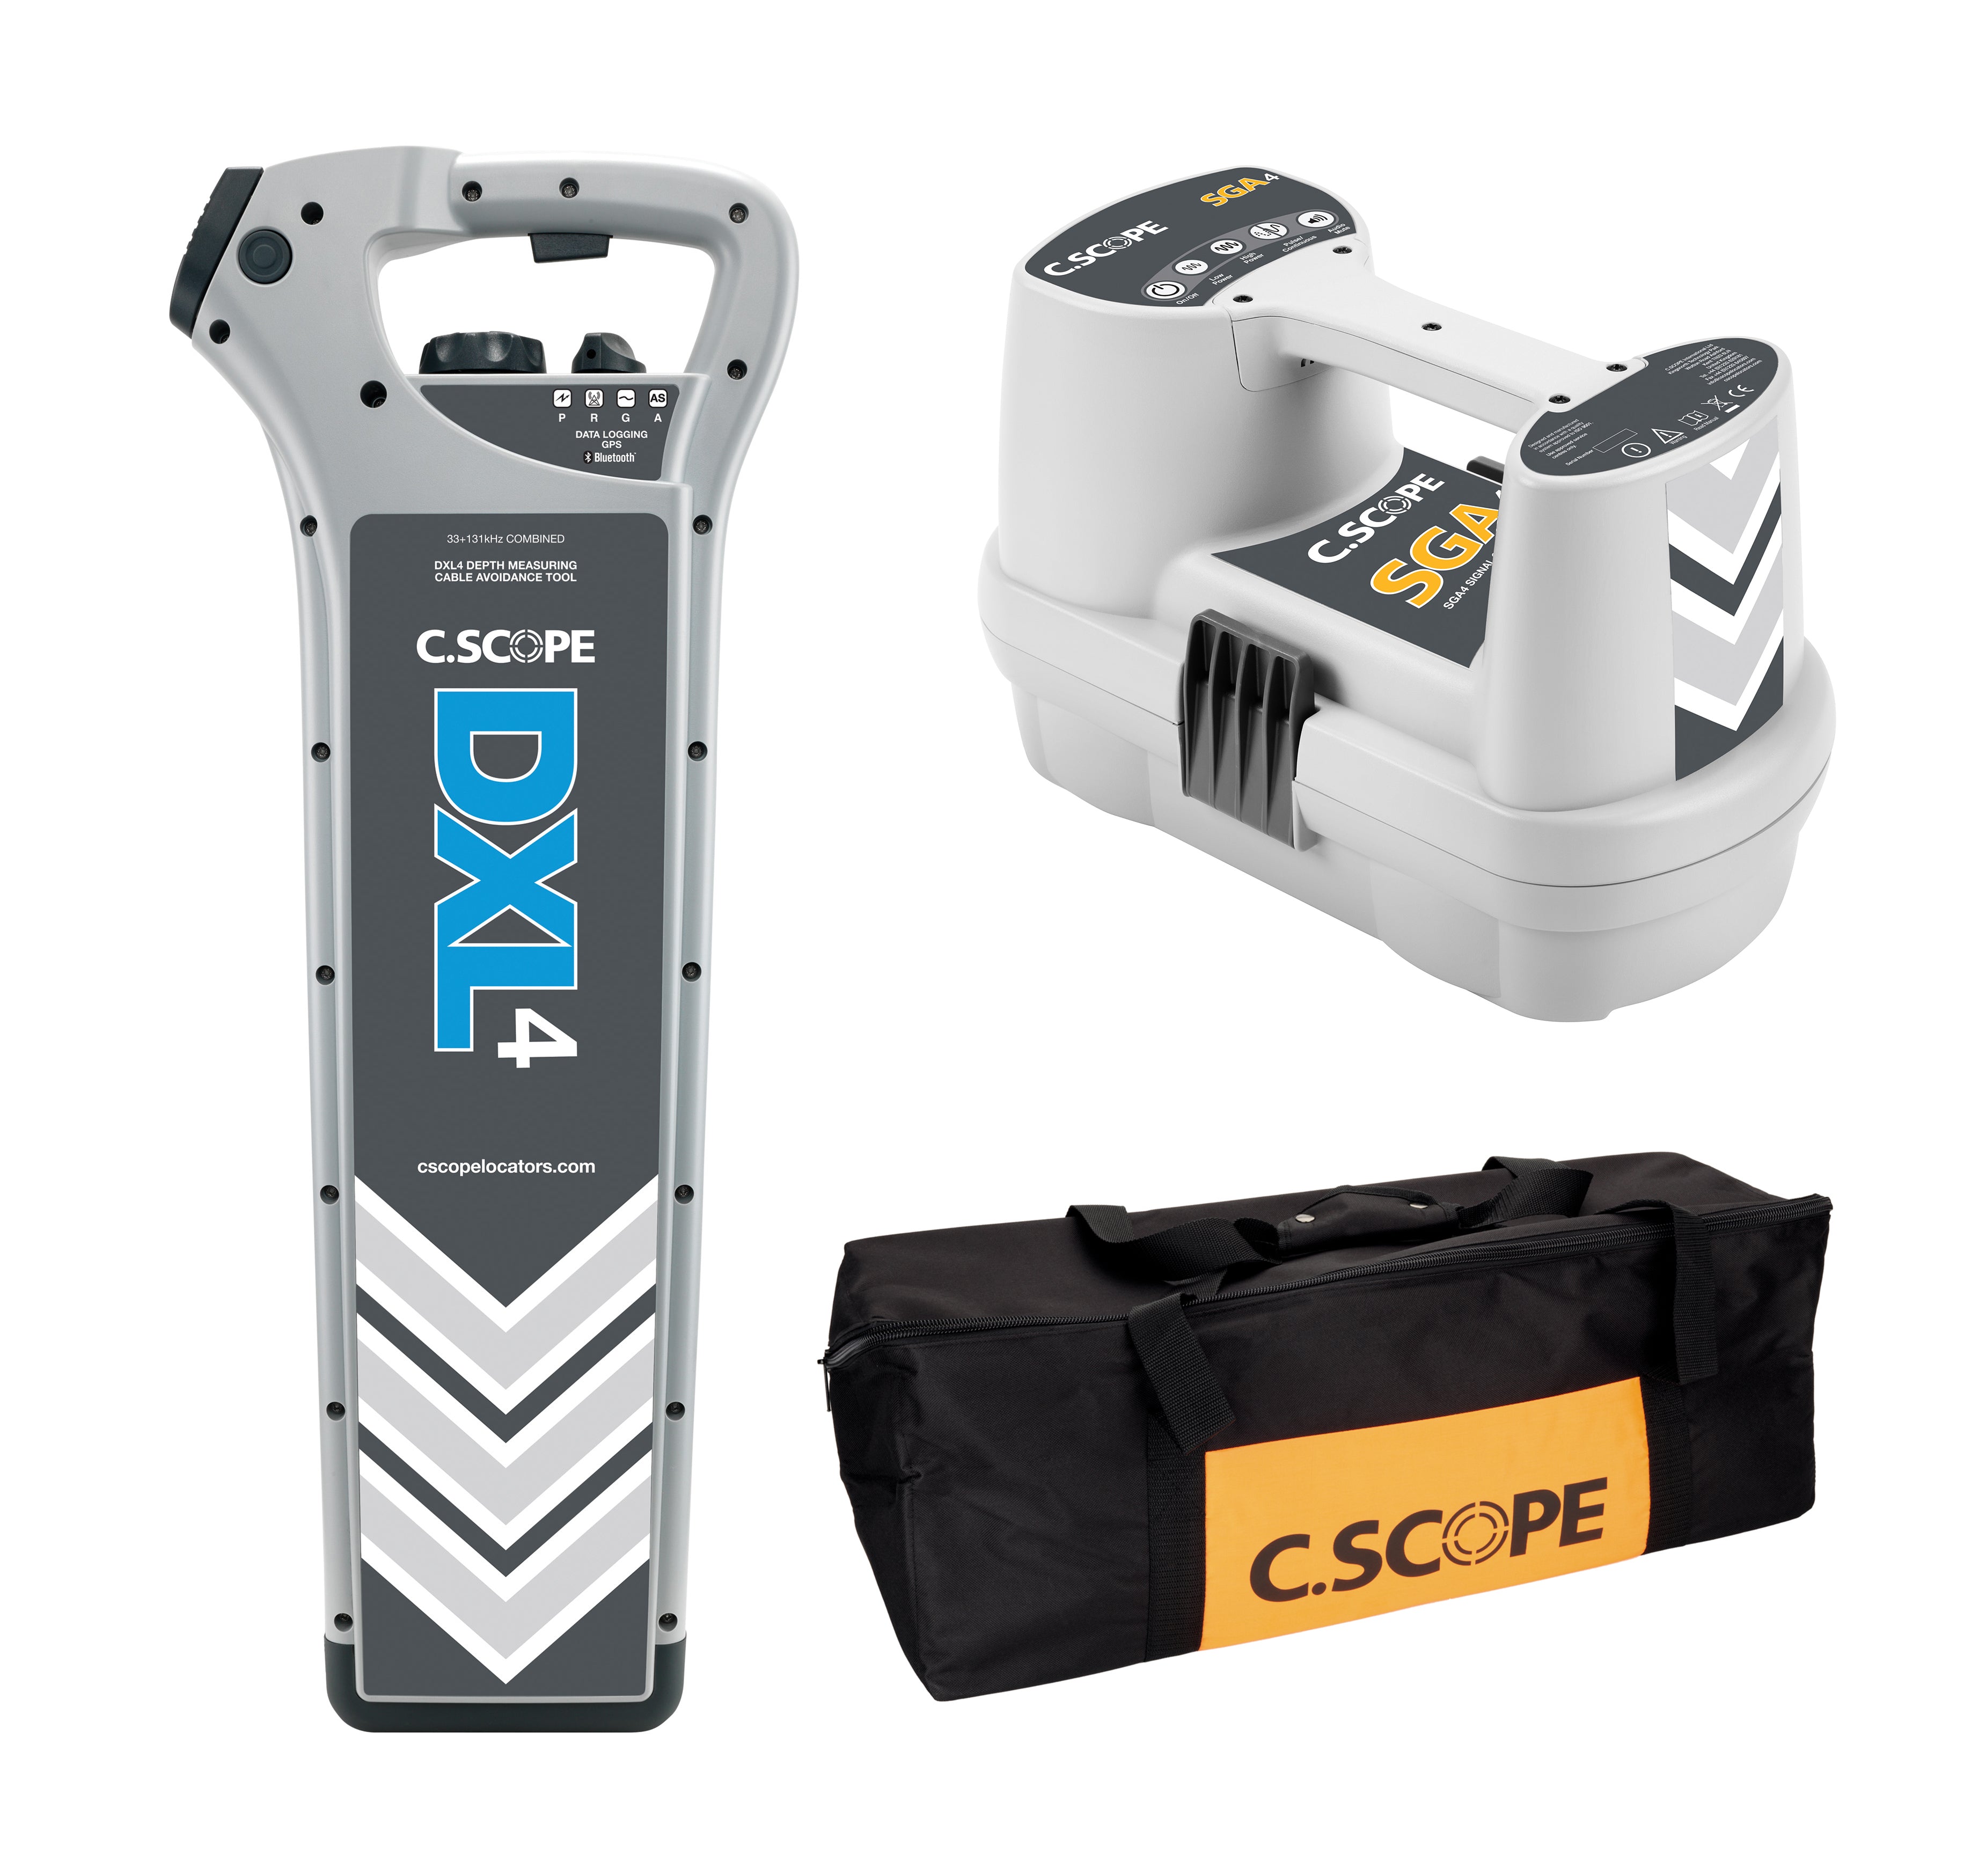 C.Scope DXL4-DBG Depth, Datalogging and GPS Cable Avoidance Kit with SGA4 and Bag - Subtech Safety Limited